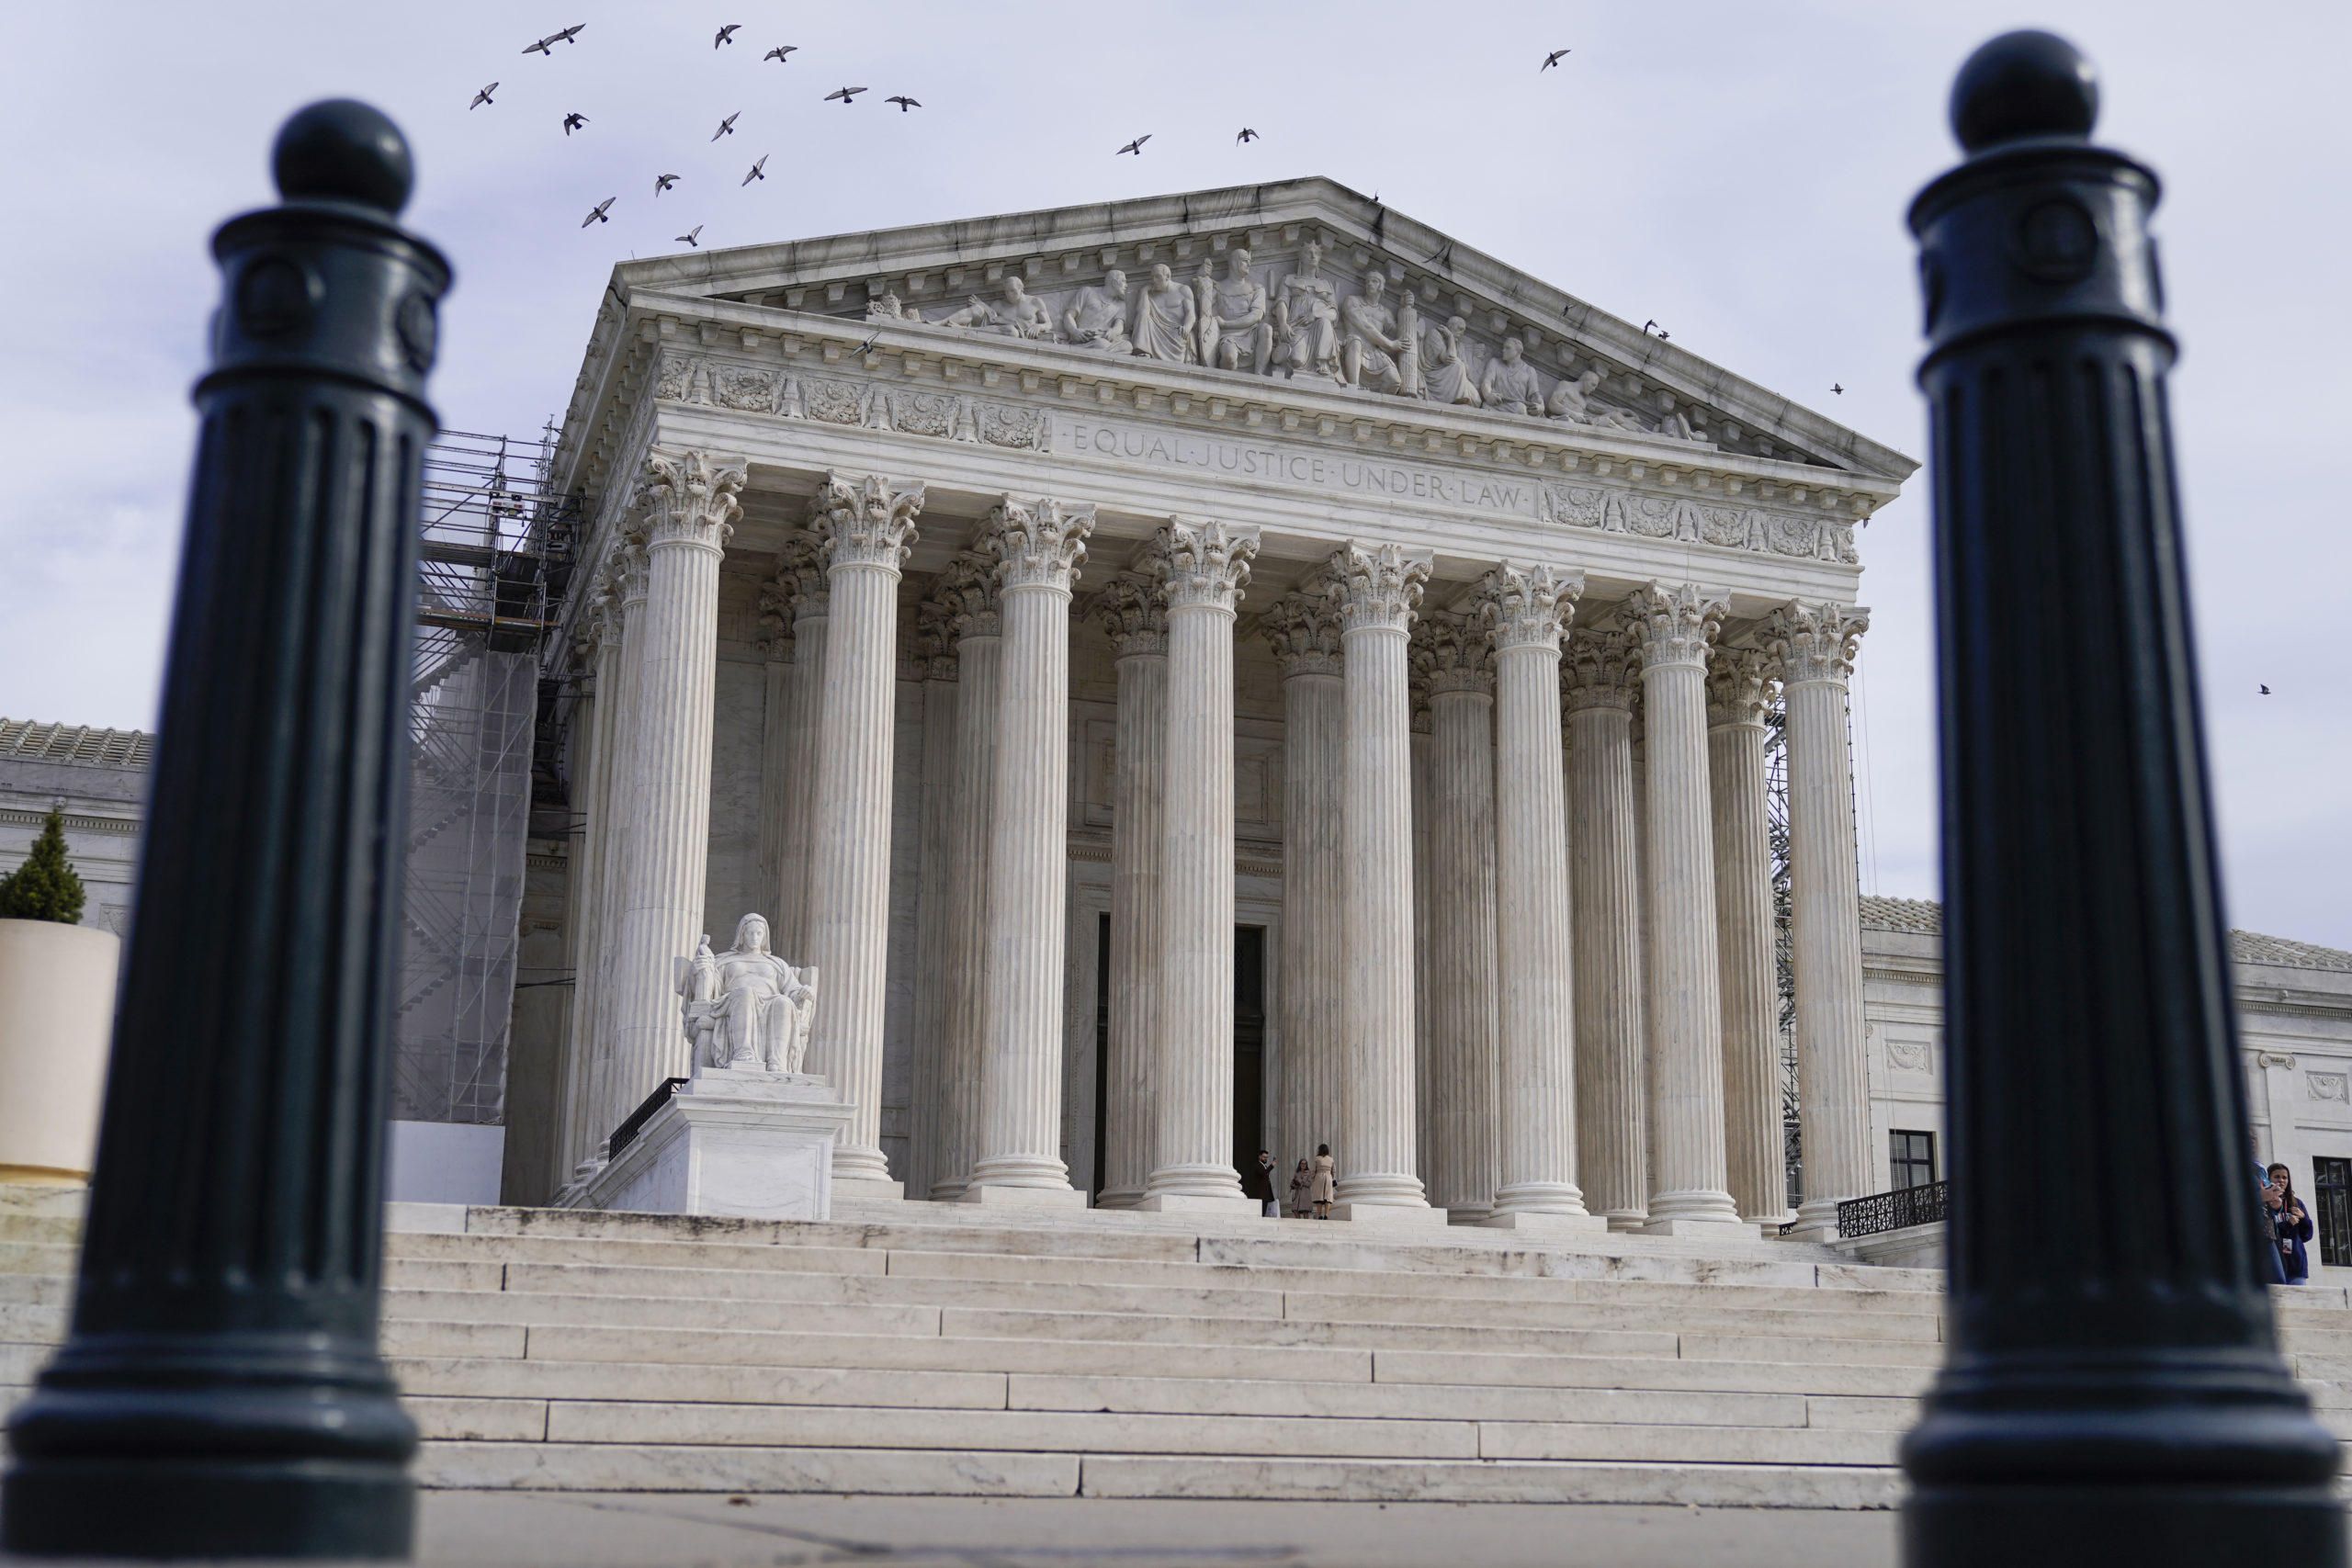 The exterior of the U.S. Supreme Court in Washington, D.C., is pictured on Wednesday.